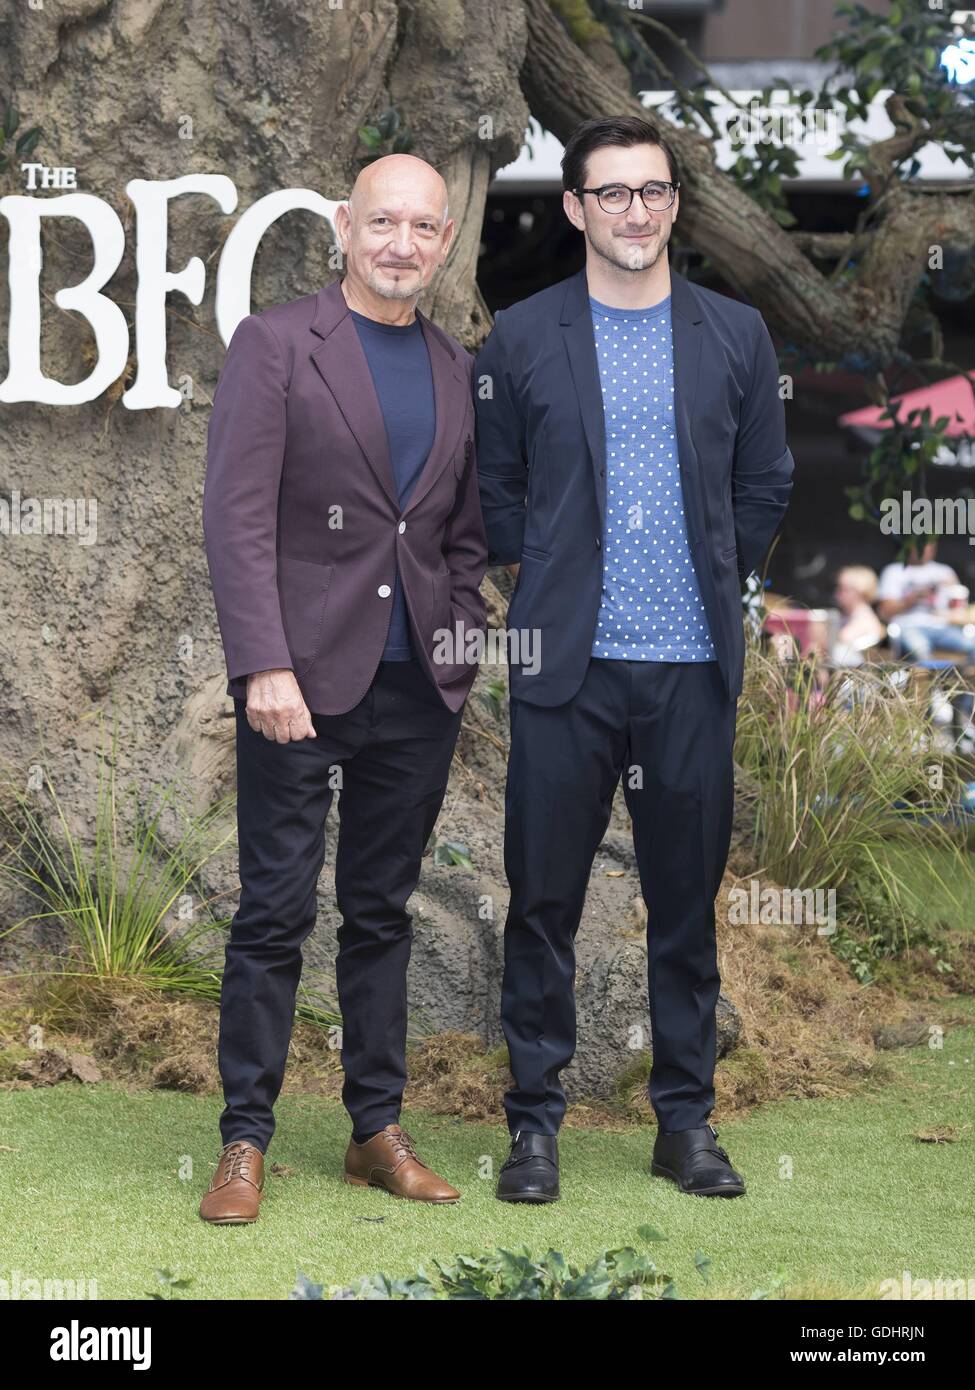 London, United Kingdom Of Great Britain And Northern Ireland. 17th July, 2016. Sir Ben Kingsley and Ferdinand Kingsley, The BFG film premiere at Leicester Square in London. 17/07/2016 | usage worldwide/picture alliance Credit:  dpa/Alamy Live News Stock Photo